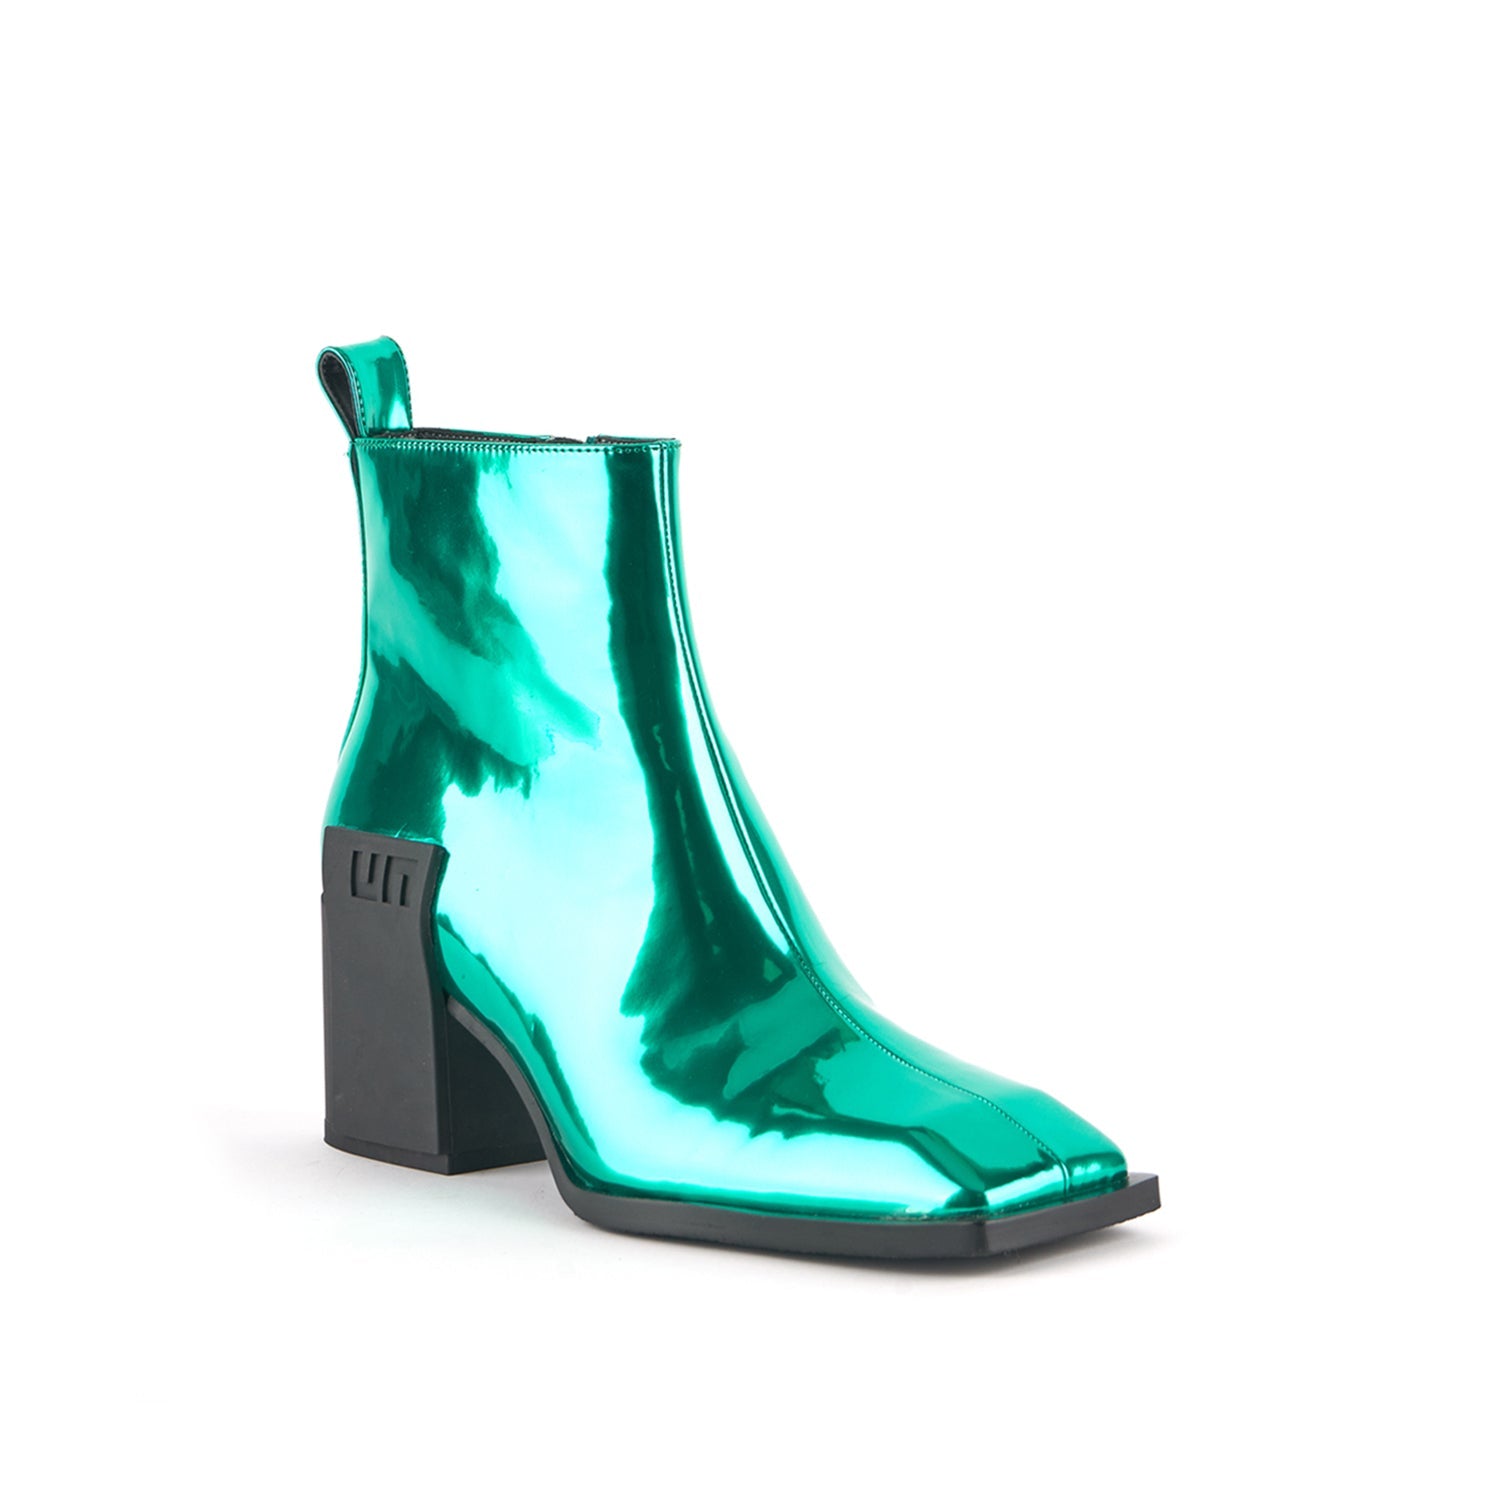 ESTIME Blue, purple and green patent leather boots